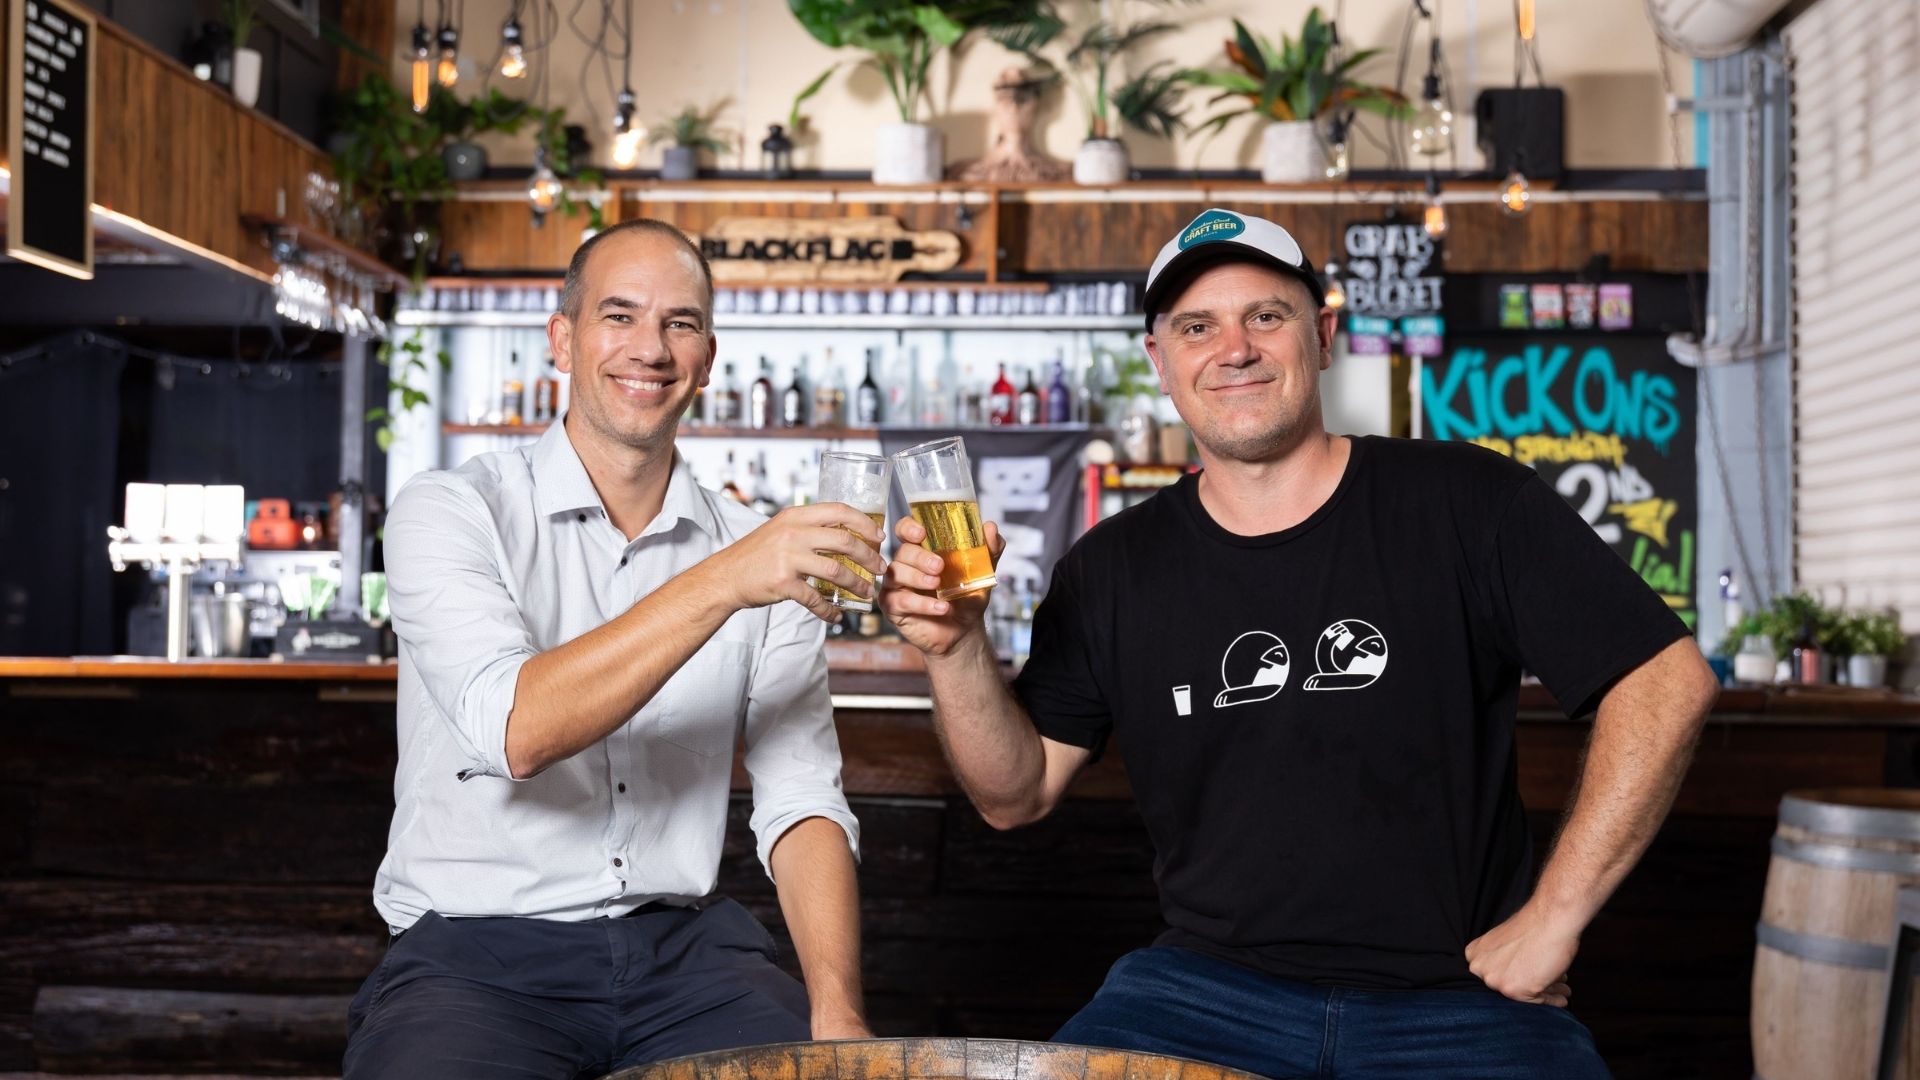 Sunshine Coast says ‘cheers’ to open borders by announcing Australia’s biggest welcome back party at region’s 21 craft breweries